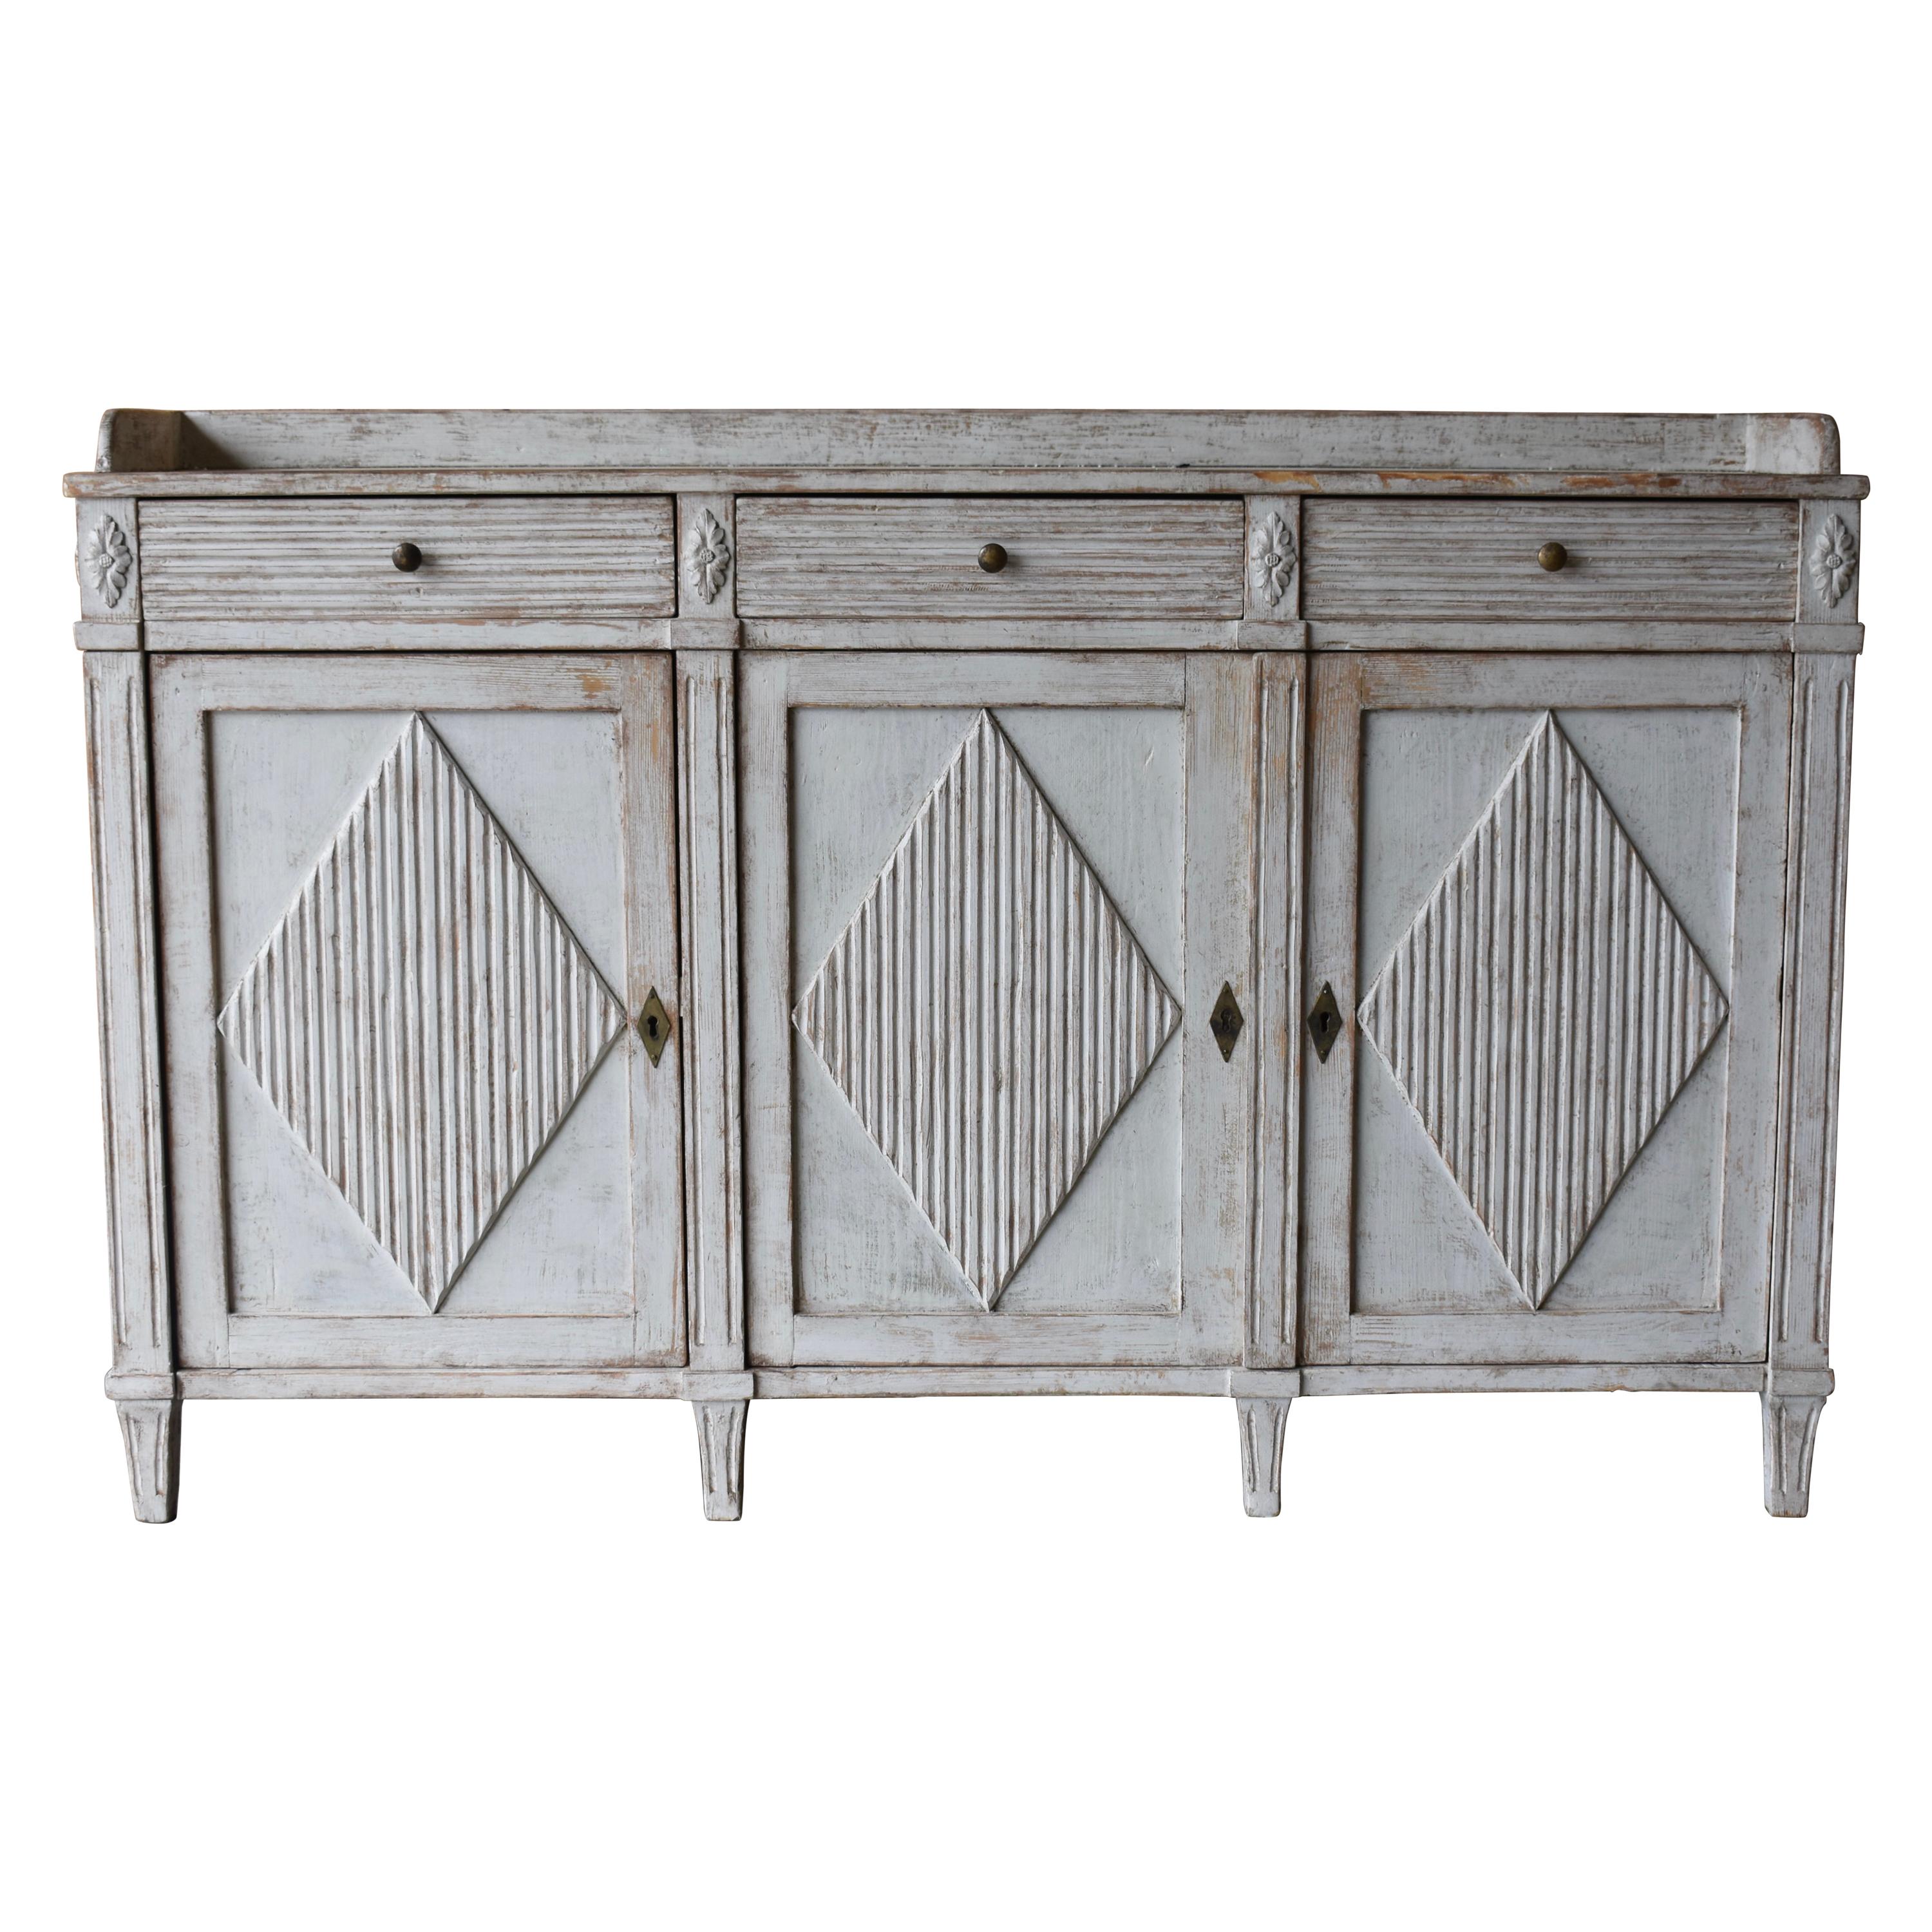 Early 19th Century Swedish Sideboard For Sale